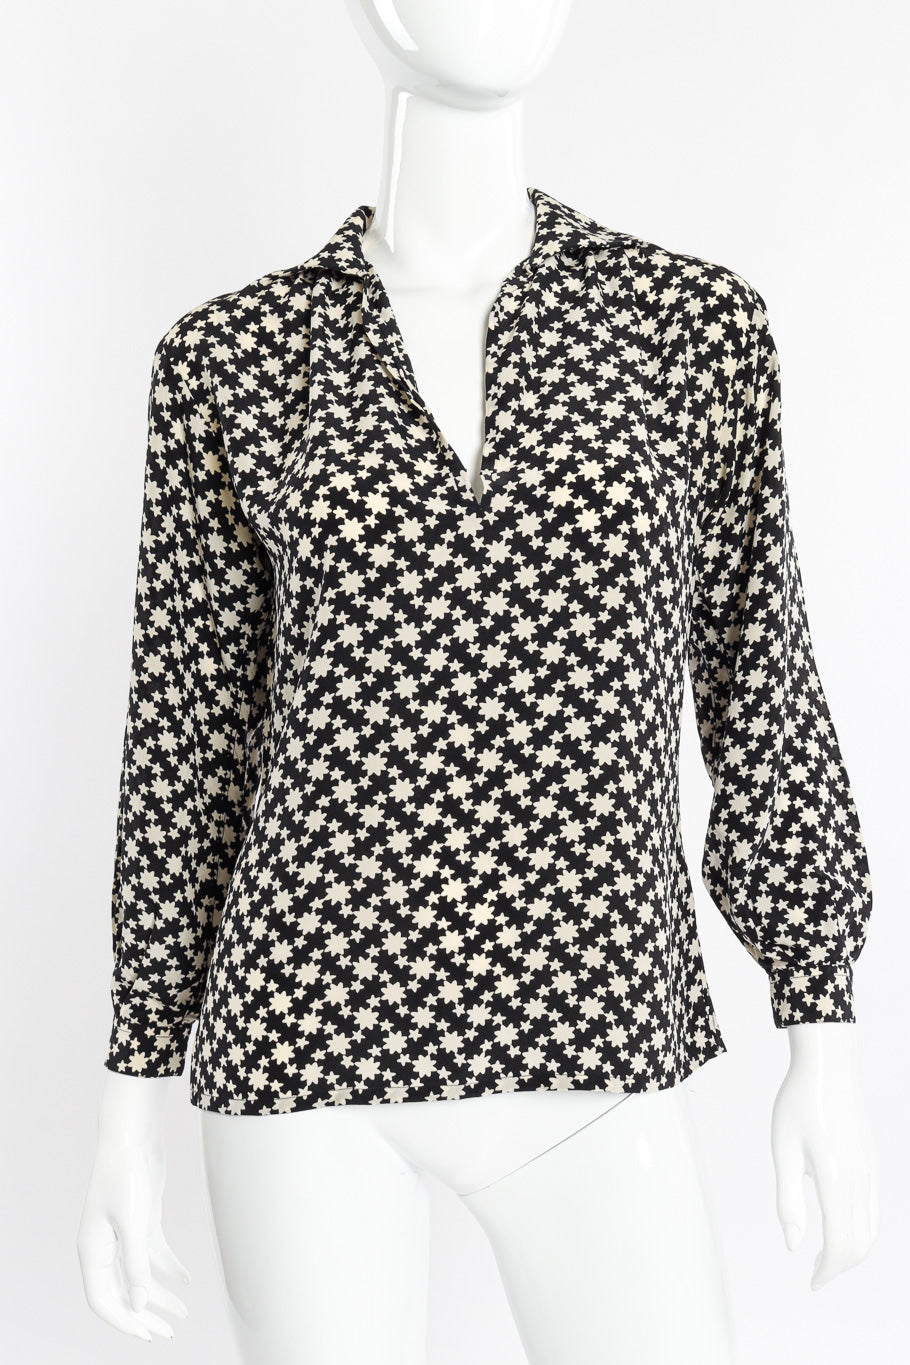 Star print blouse by Yves Saint Laurent on mannequin neck untied @recessla